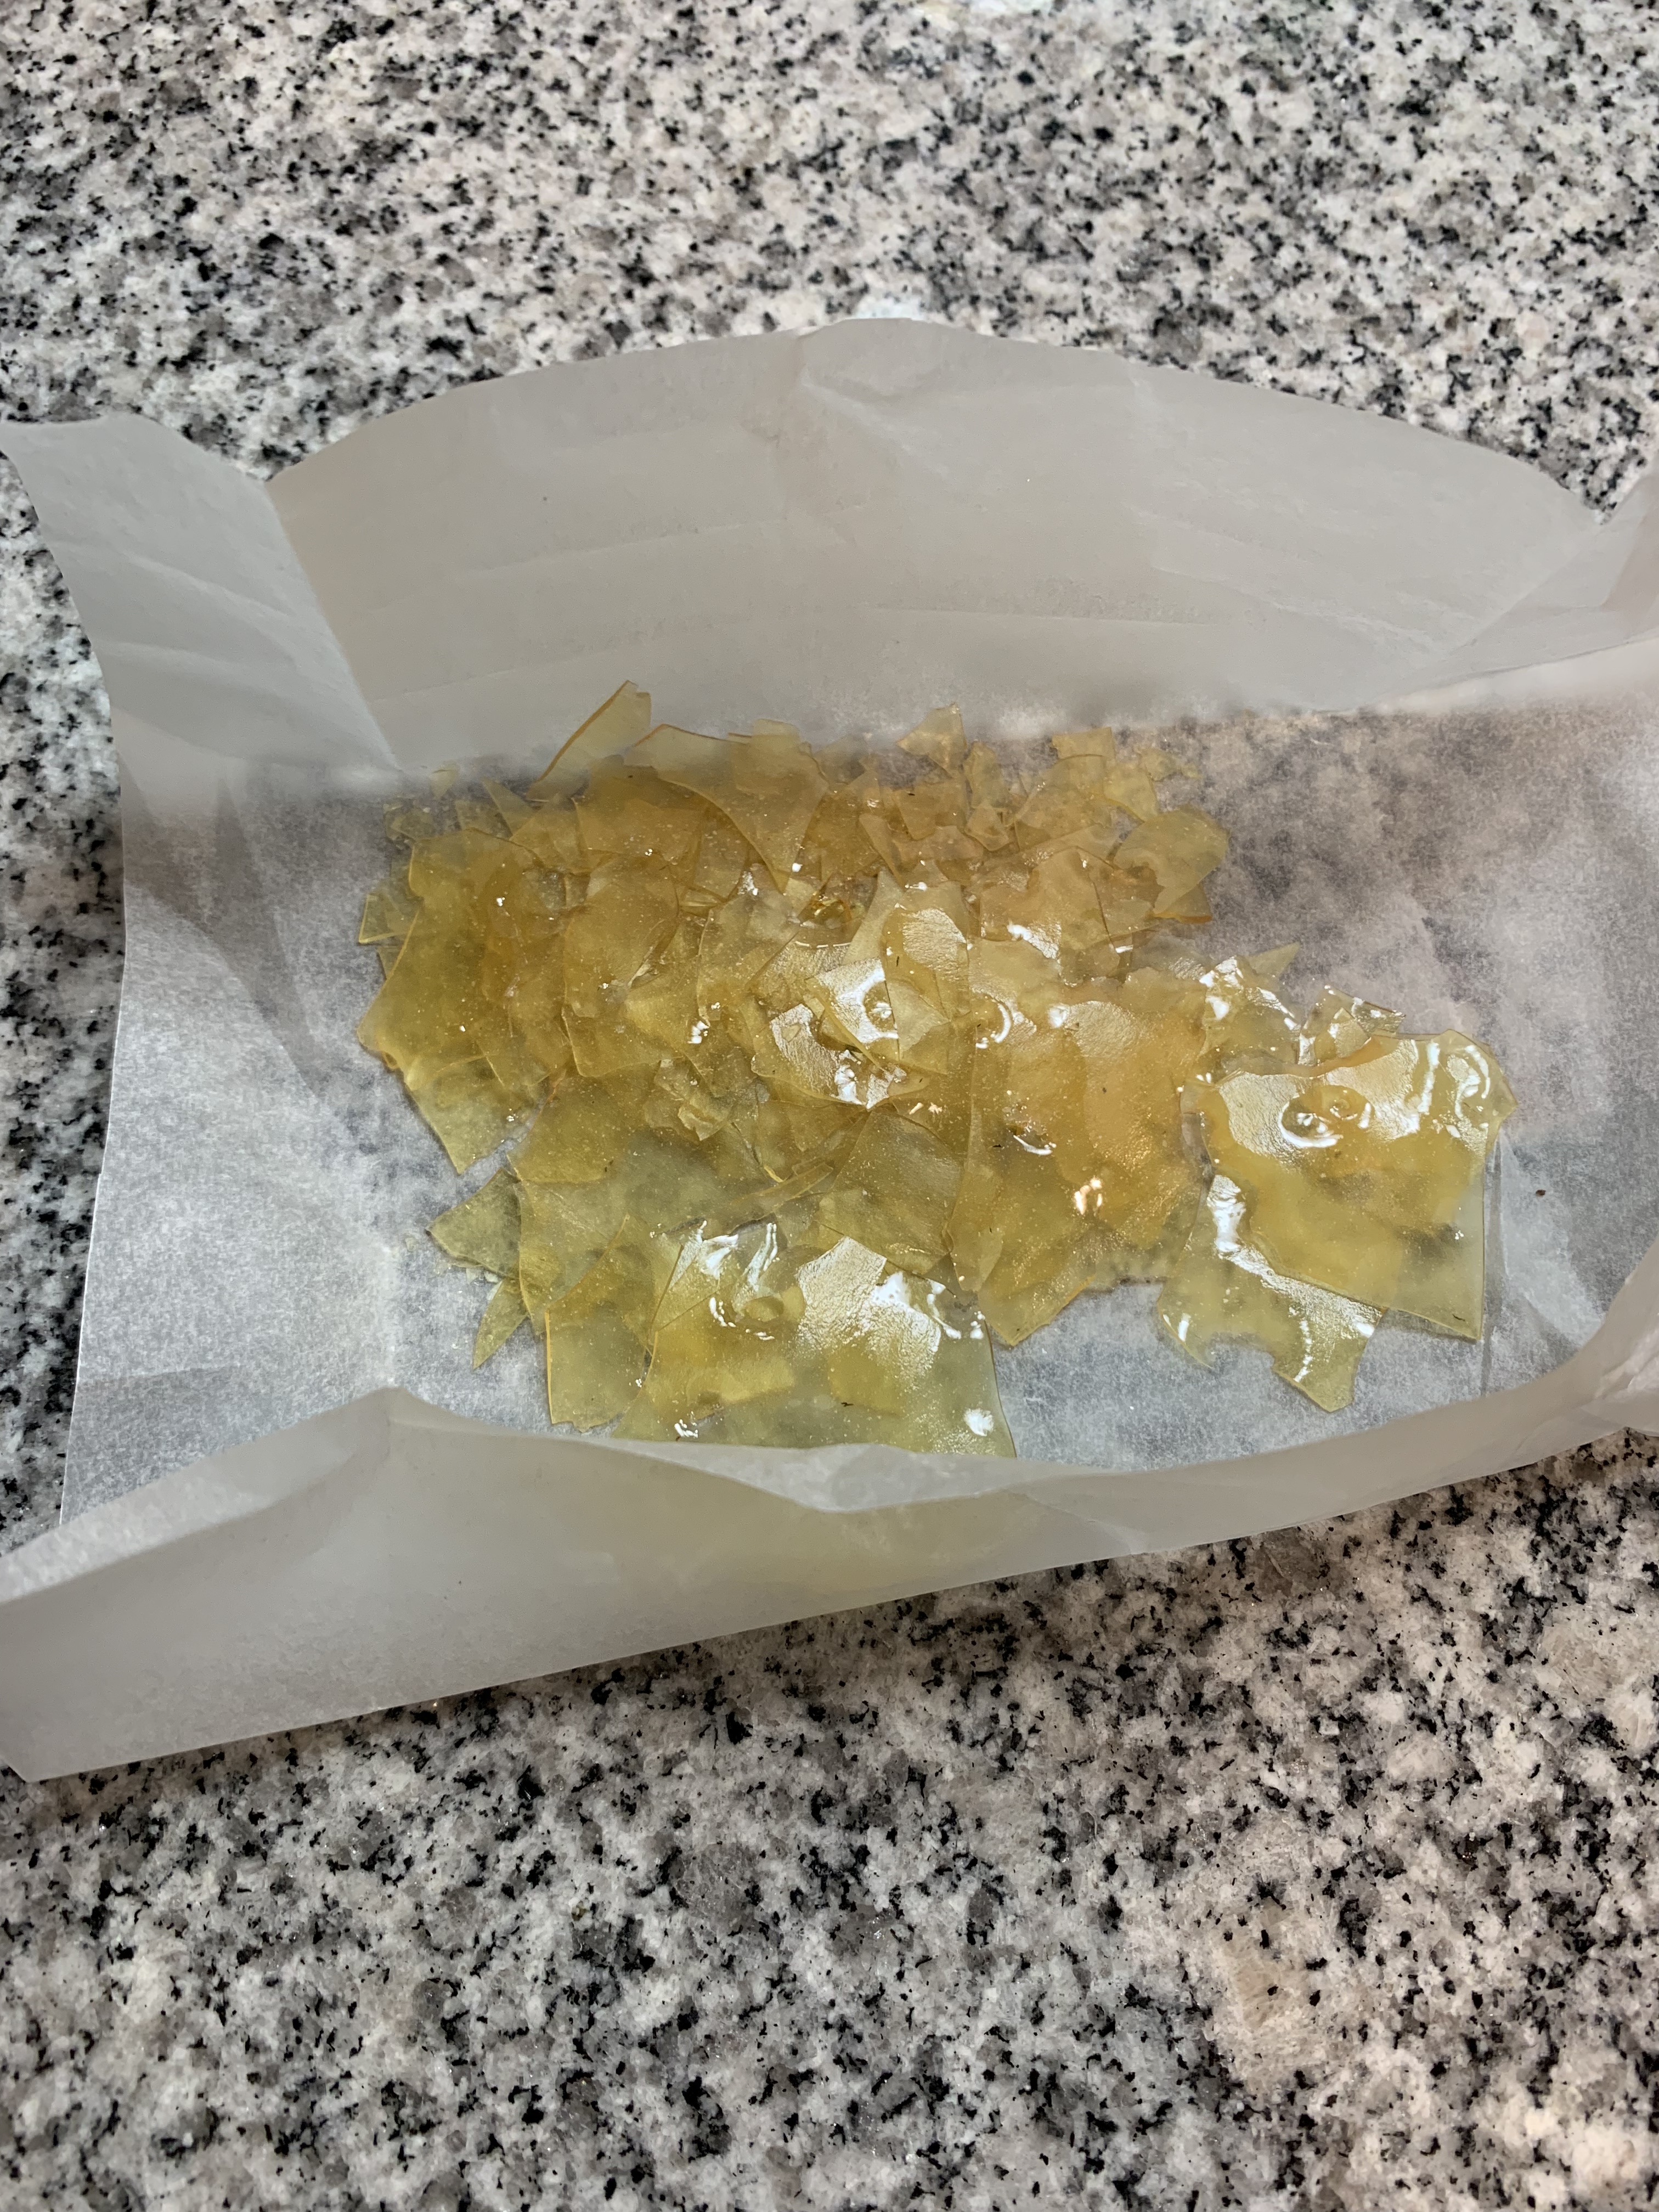 Fake shatter - Pine Resin cut hit Canada? - #39 by itsyoboydevon -  CannaBusiness - Future4200